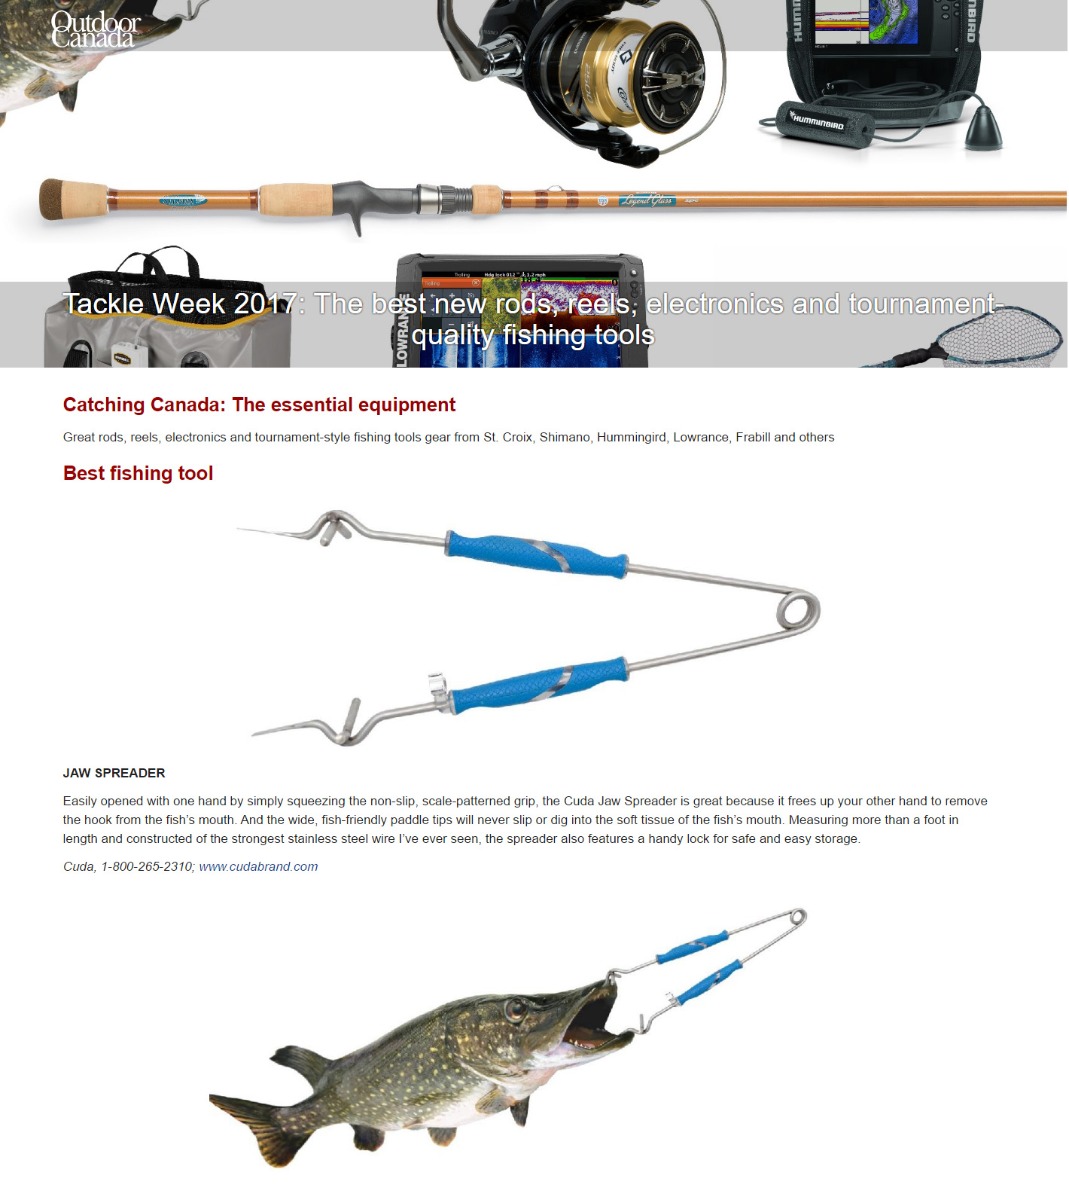 Best fishing tool - Featured in outdoorcanada.ca Tackle Week 2017 